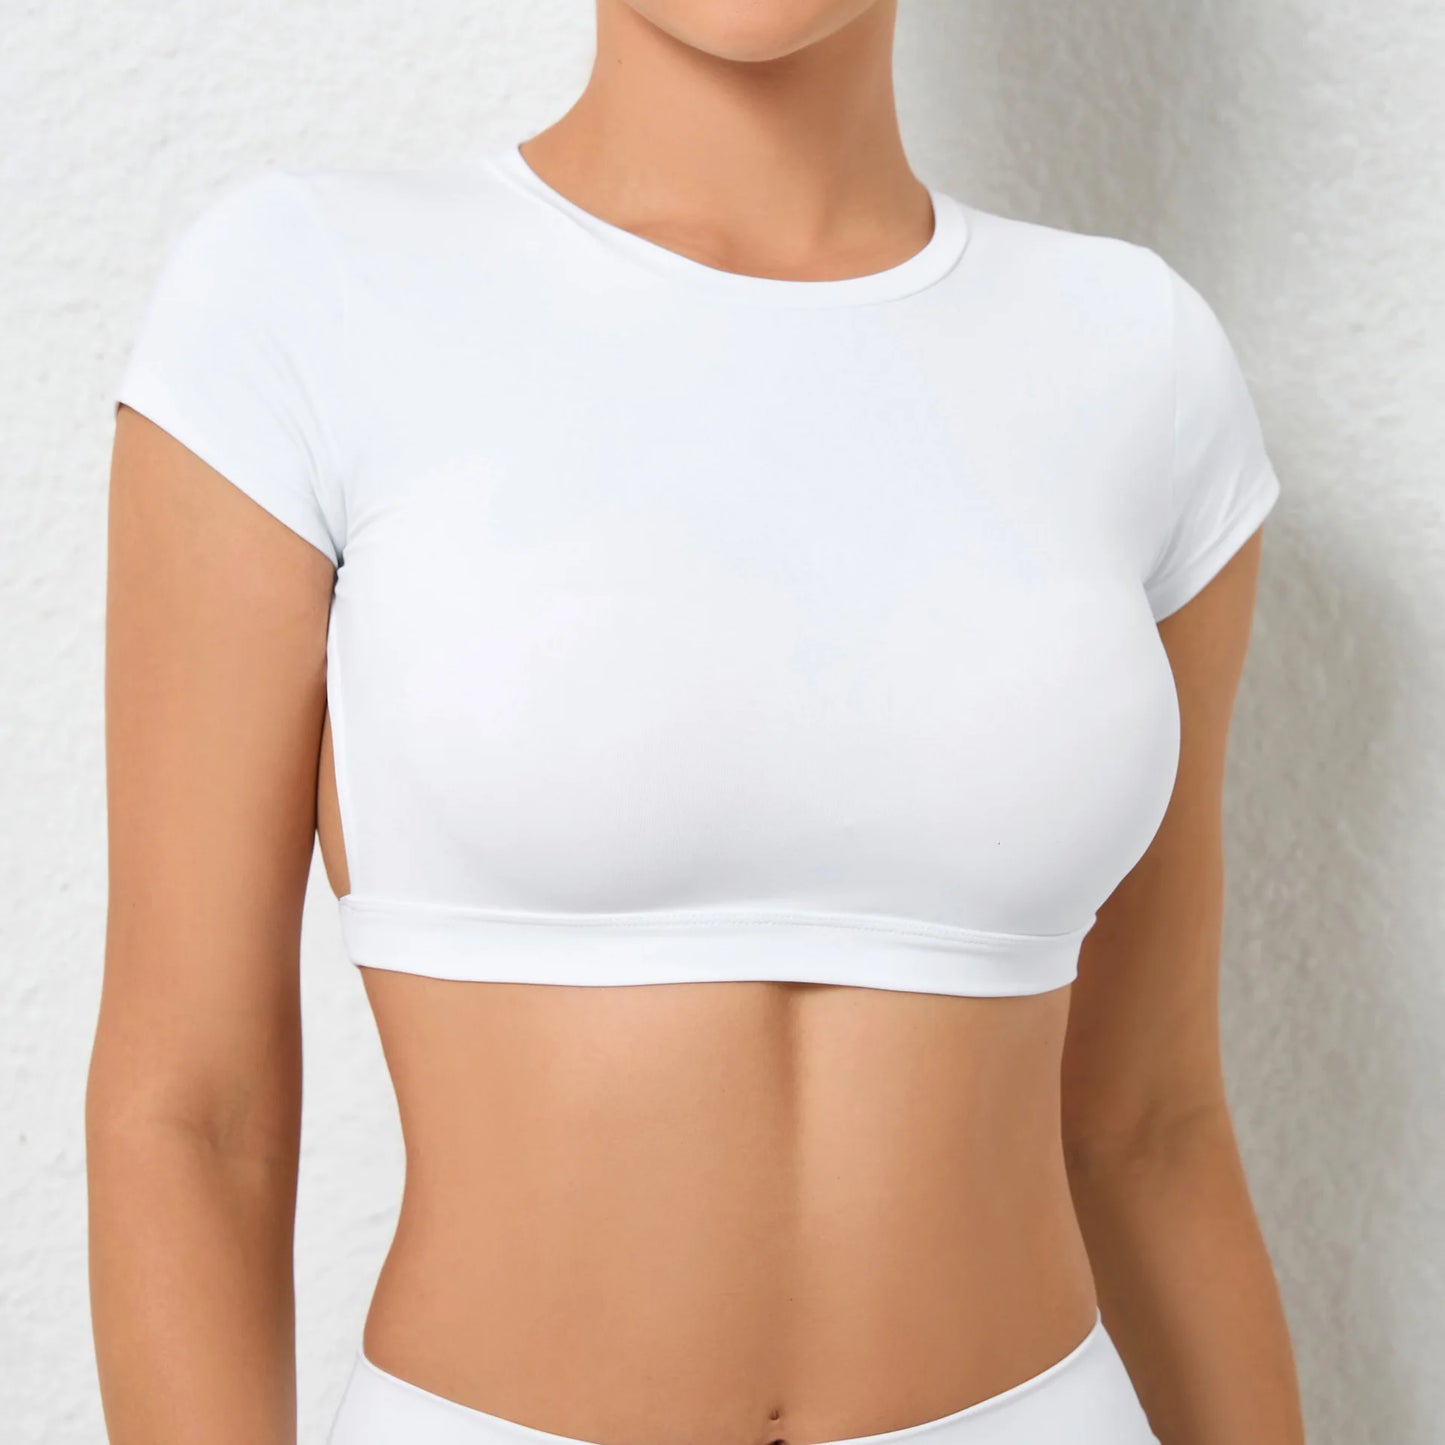 Hollow Crop Top Short Sleeve Yoga Shirt Women's Fitness Workout Tops Gym Clothes Sportswear Running T-shirts The Clothing Company Sydney